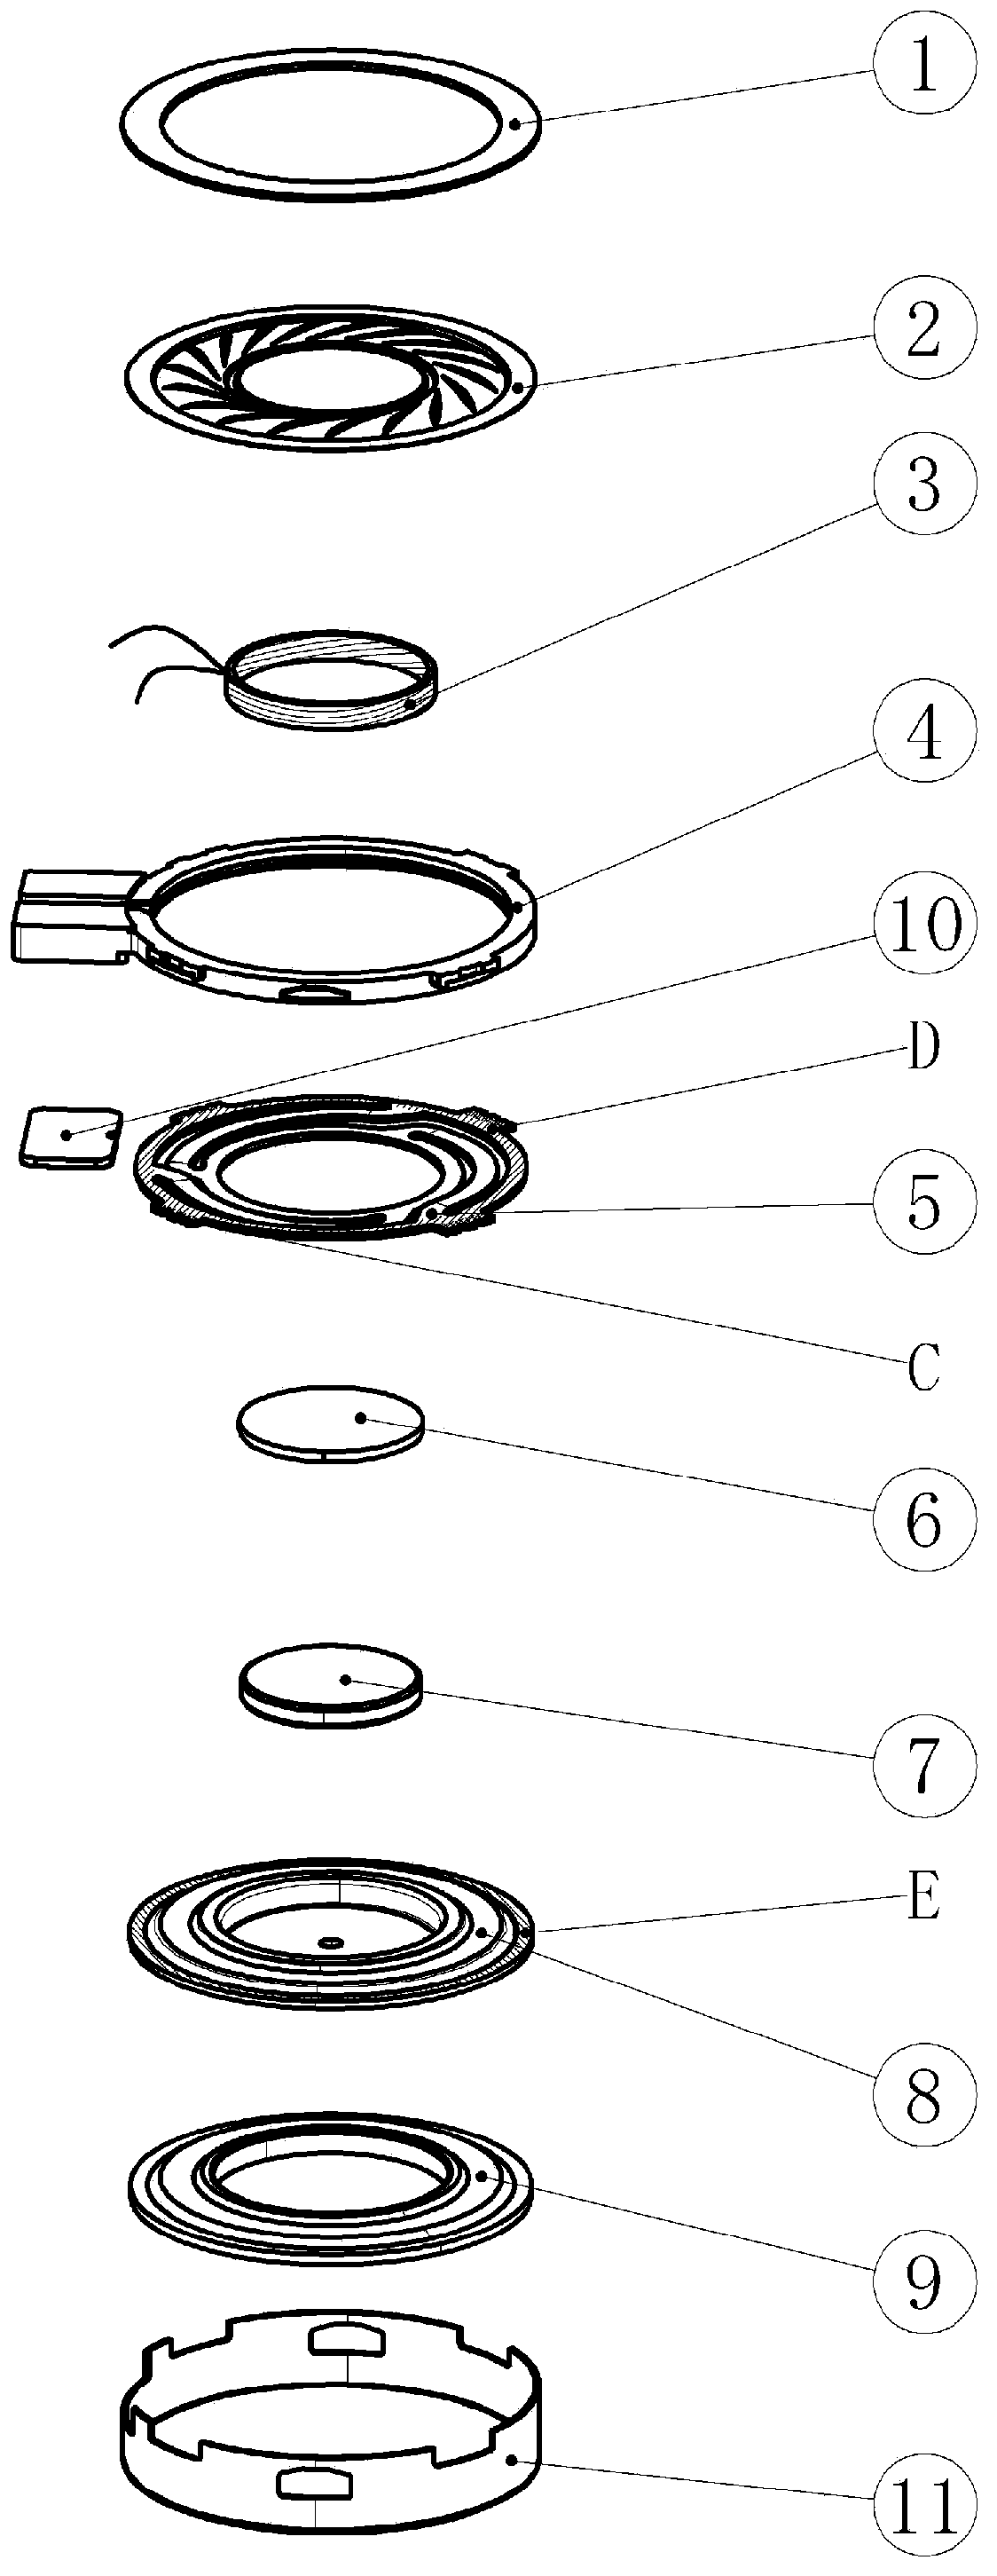 Load-resisting structure of multifunctional vibration actuator